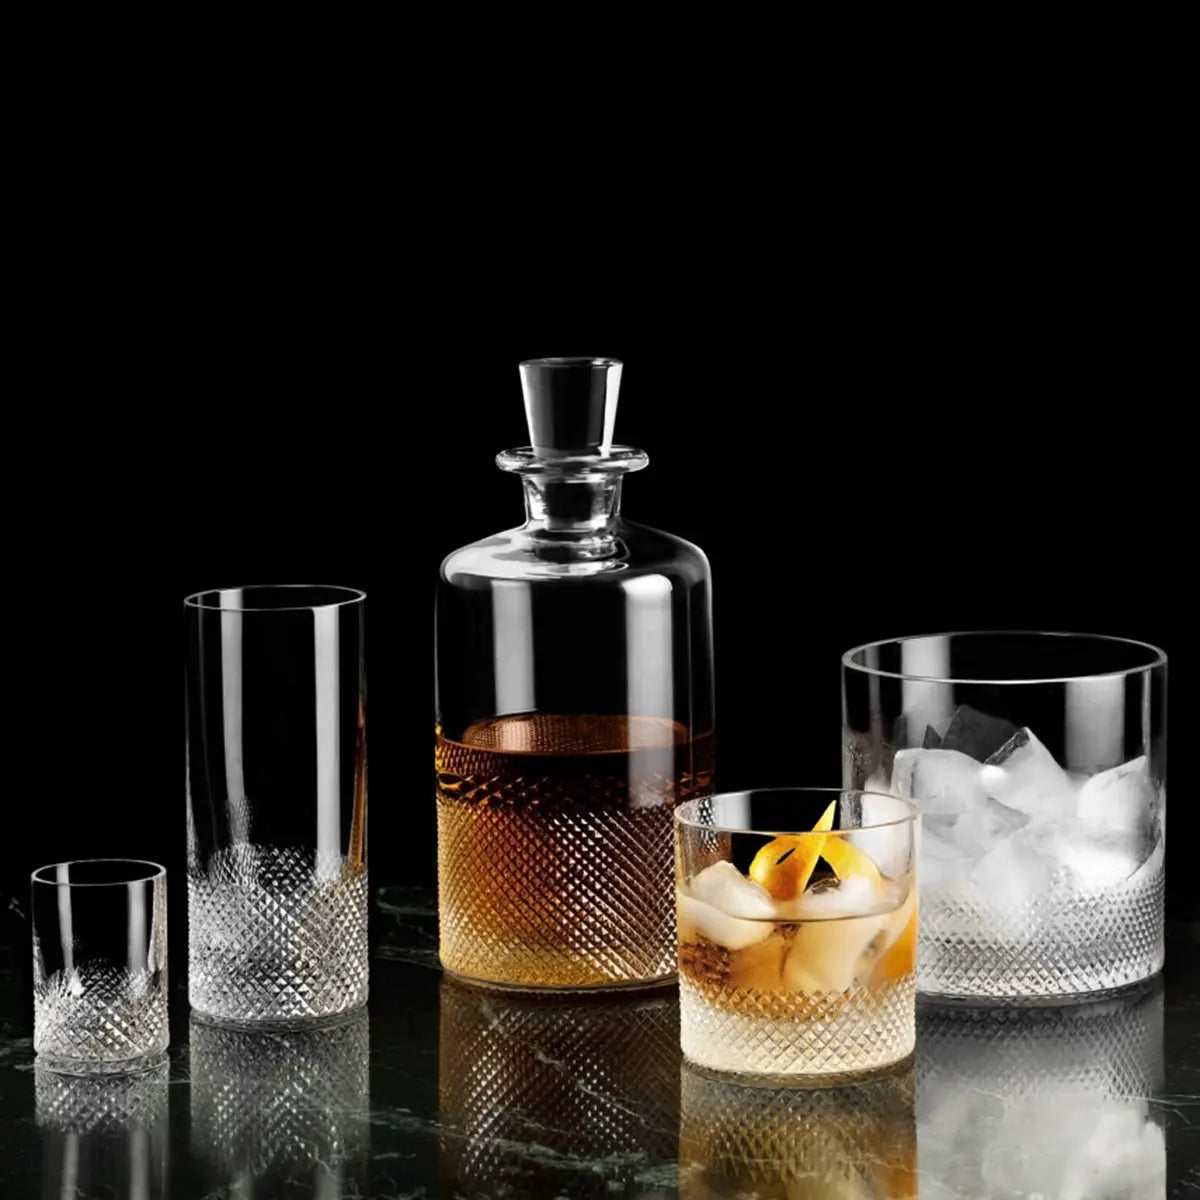 Richard Brendon Diamond Highball glass in a black room with other glassware